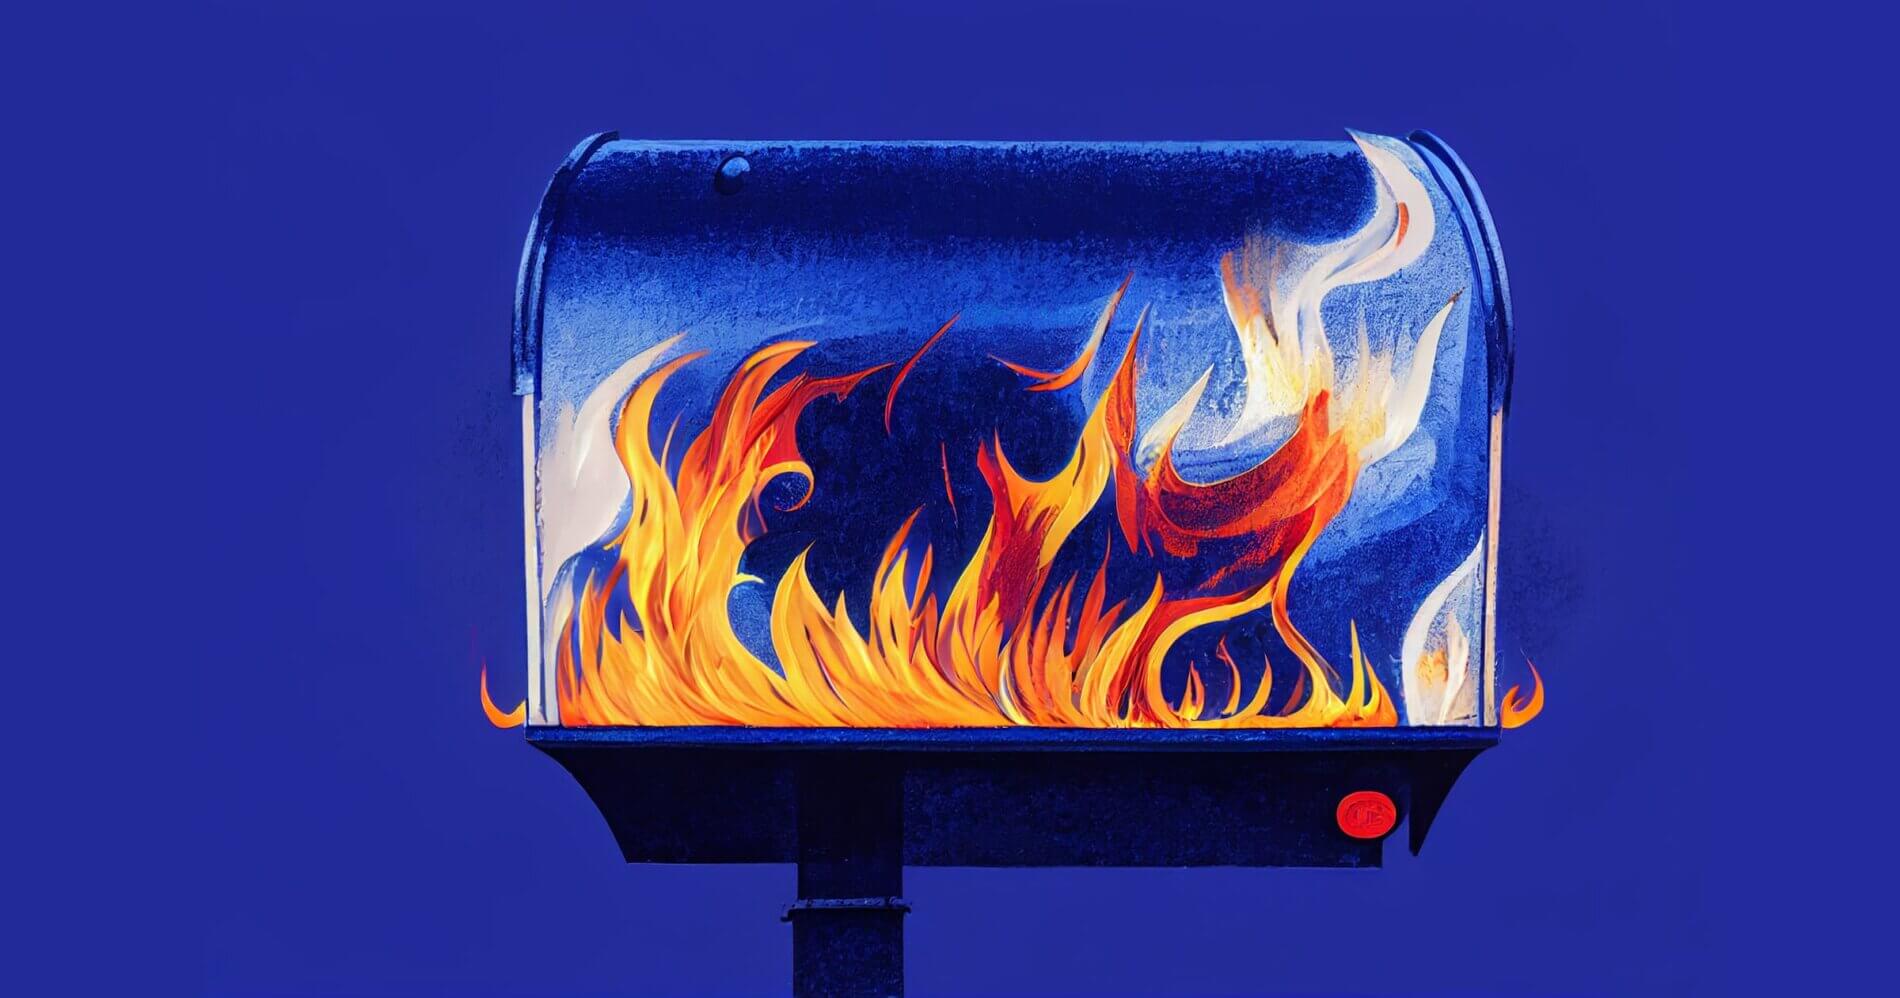 Reasons not to use Hotmail (Picture of a blue mailbox with flames inside)